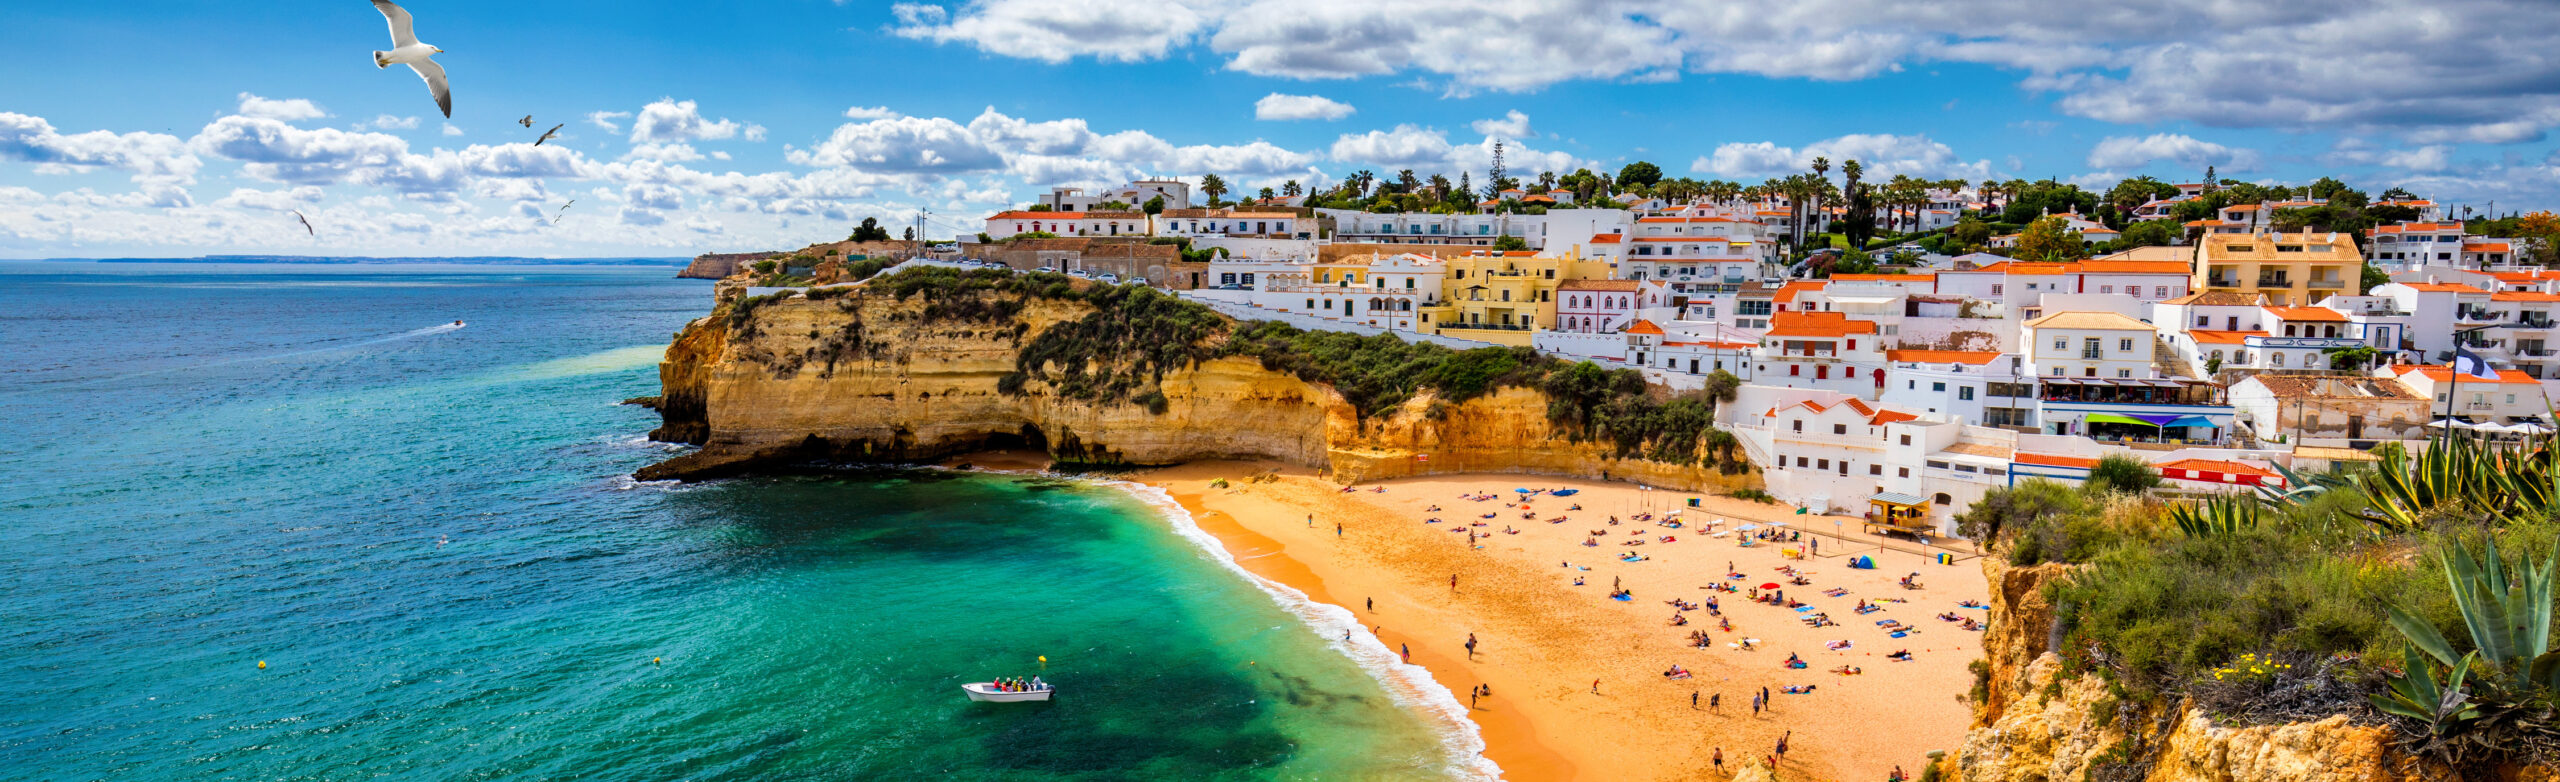 Flights to Portugal Beach front